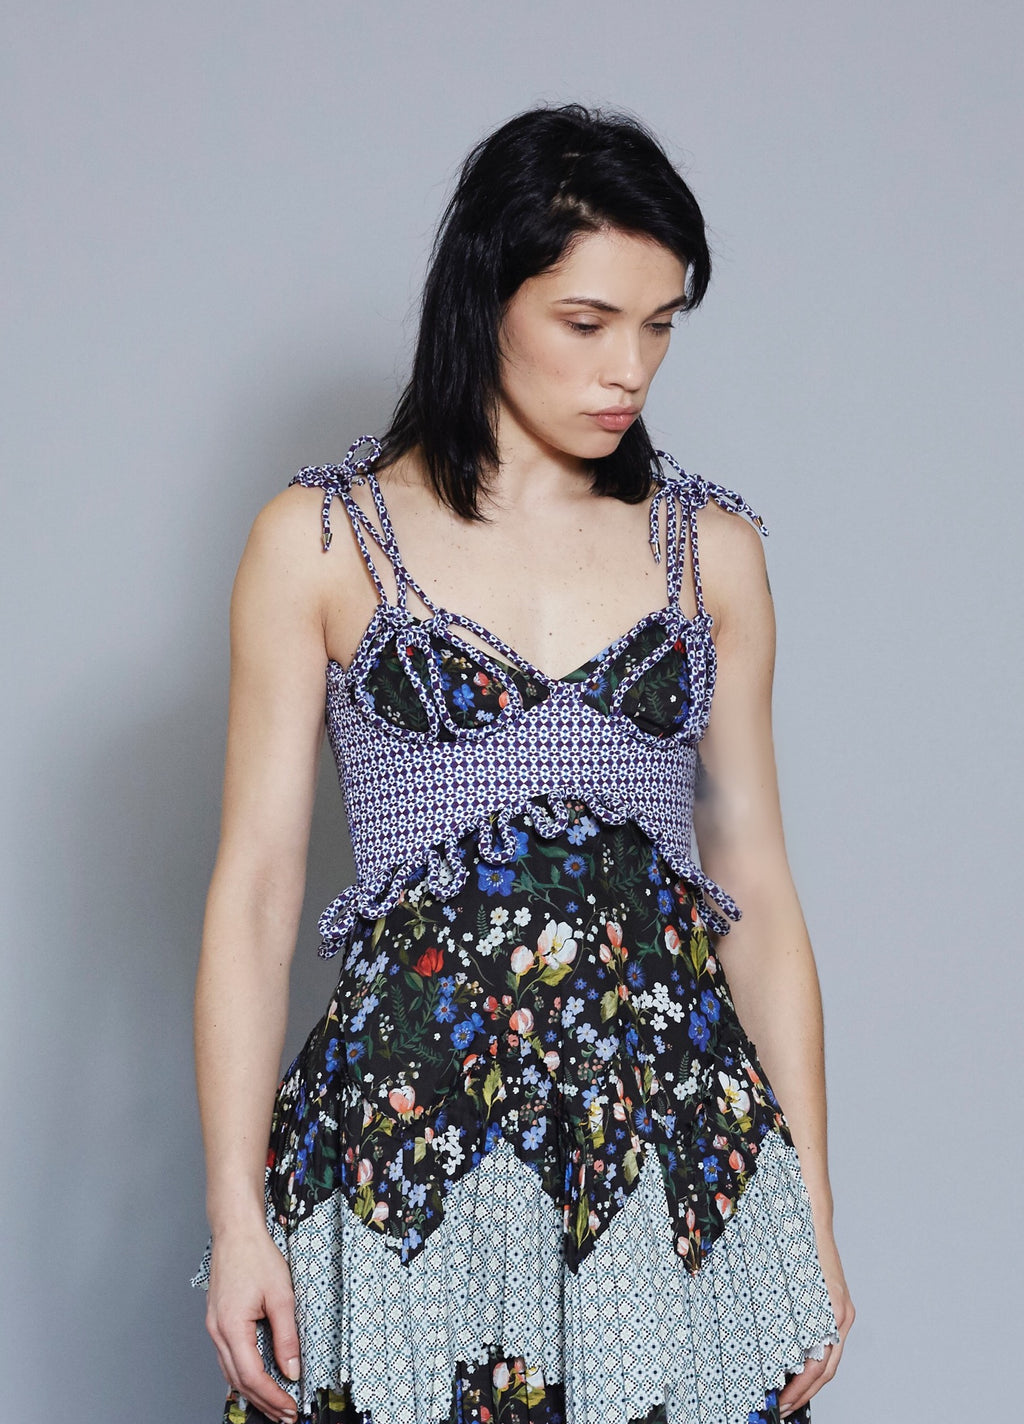 Knotted Bustier In Liberty London Tempo Tana Lawn Fabric.